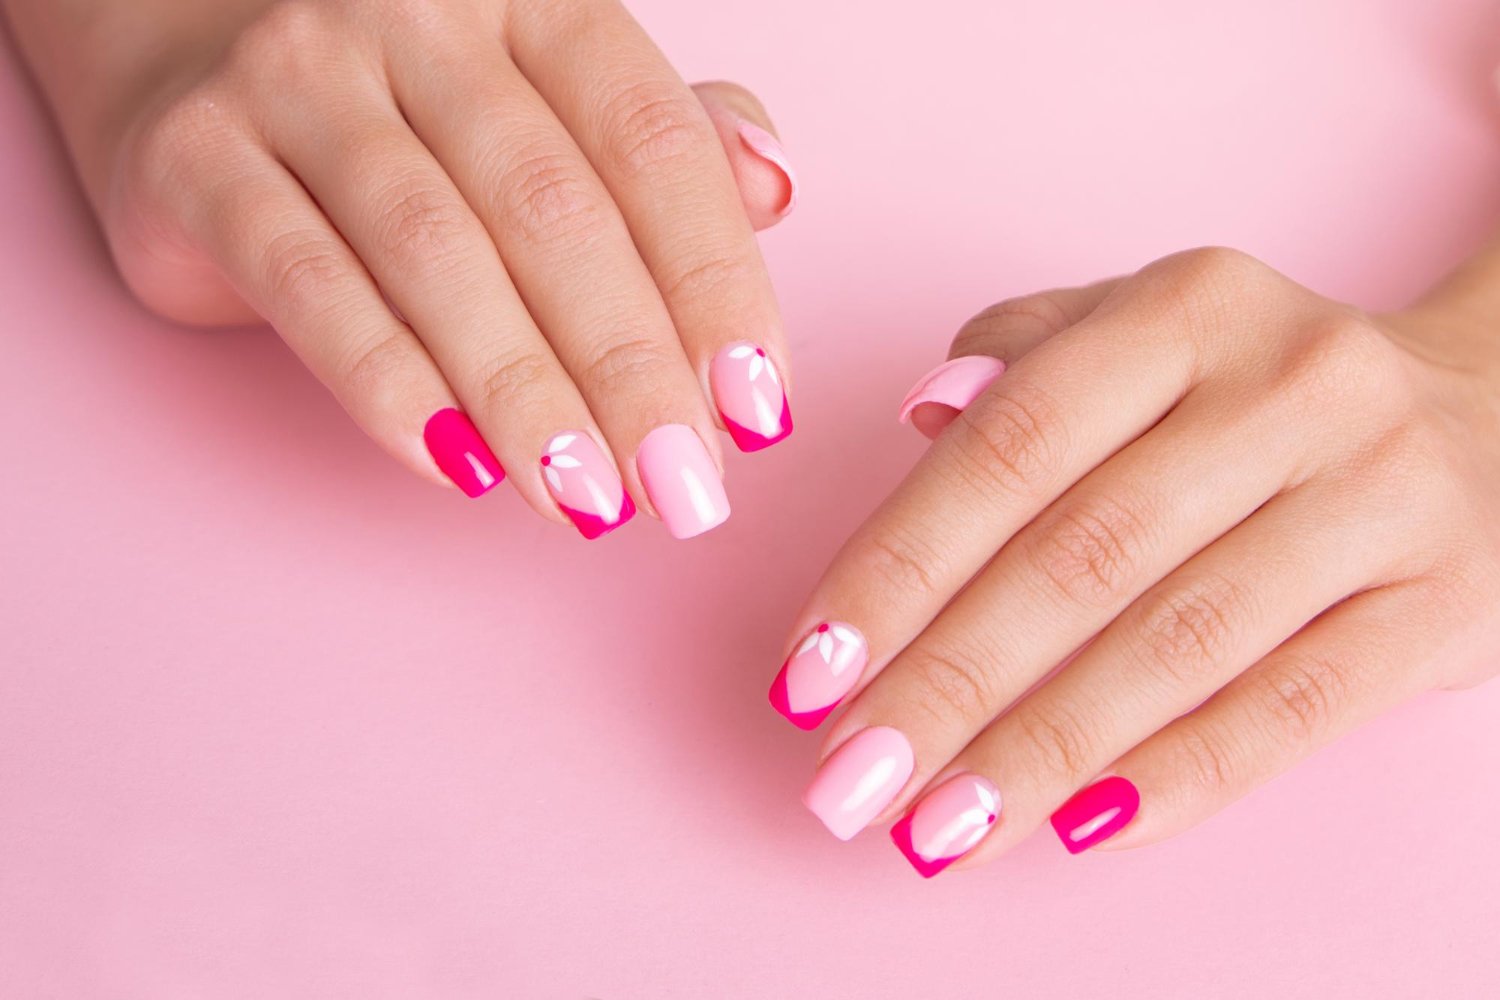 beautiful-female-hands-with-fashion-manicure-nails-flowers-design-pink-gel-polish (1)